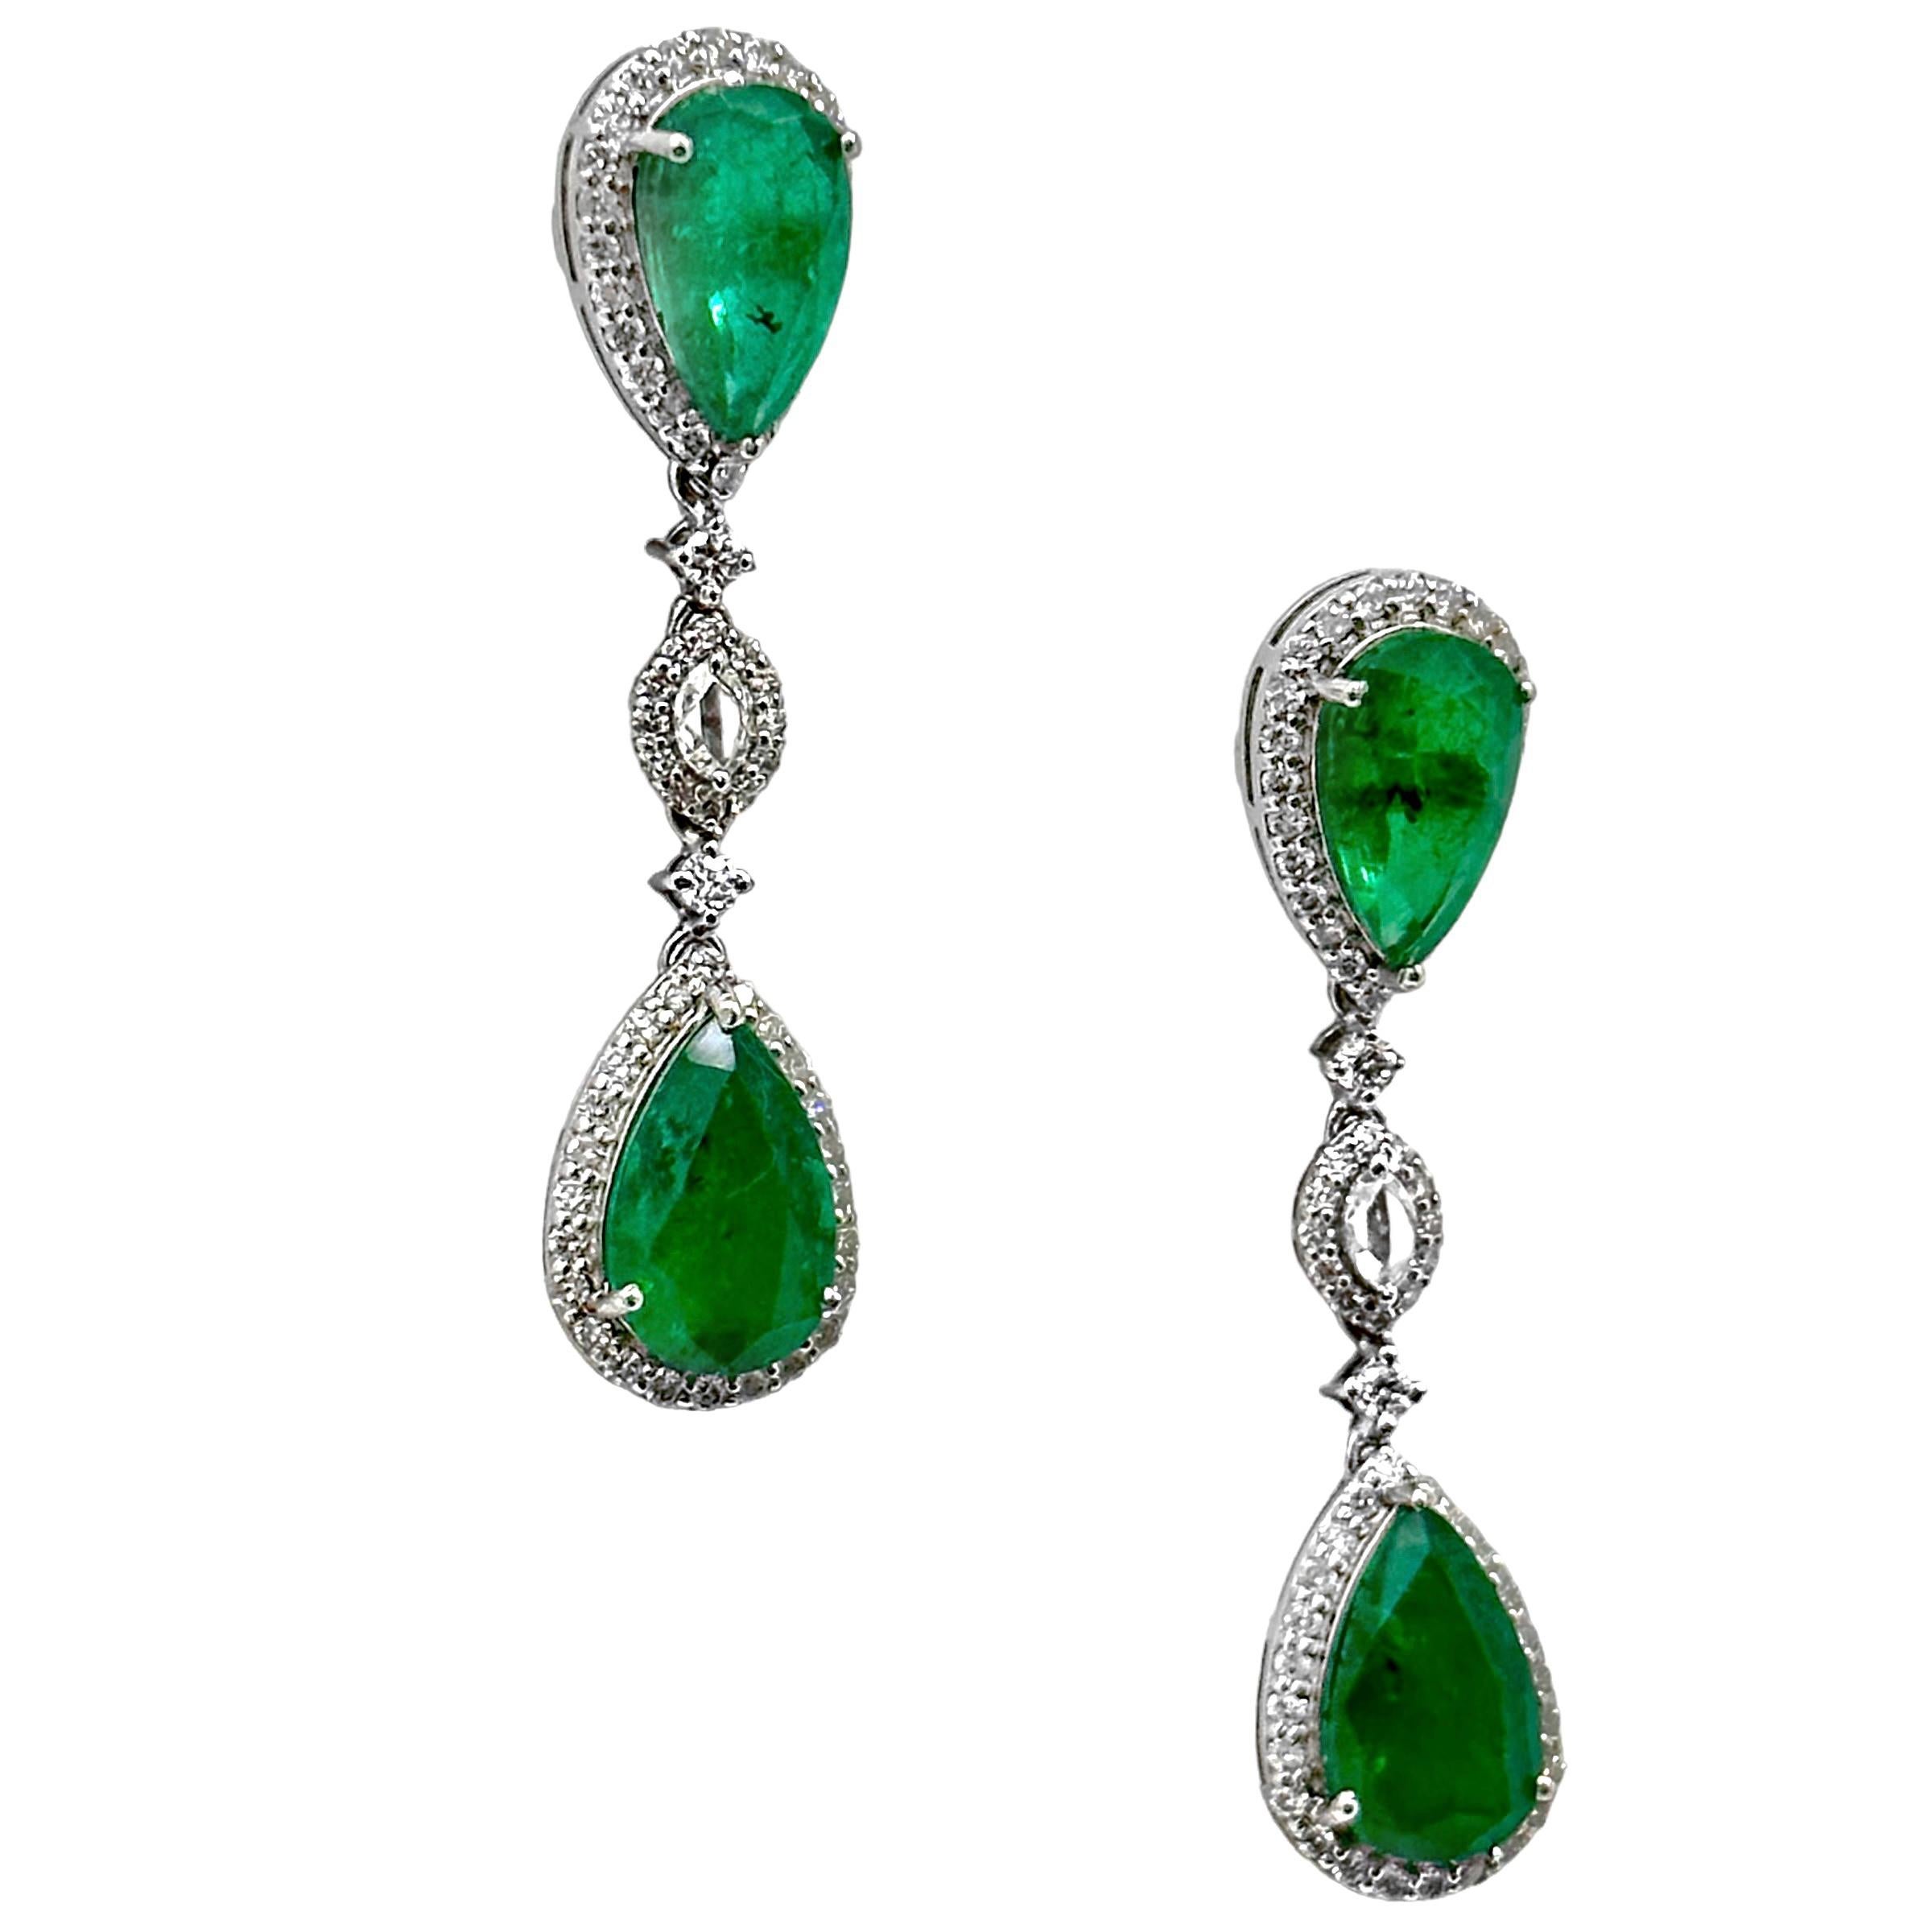 A pair of 18K white gold earrings set with four pear-shaped, vibrant emeralds, surrounded by diamonds. Measuring 1 3/4 inches long, they have an elegant appearance. The total weight of the emeralds is approximately 8.66ct, which pairs perfectly with